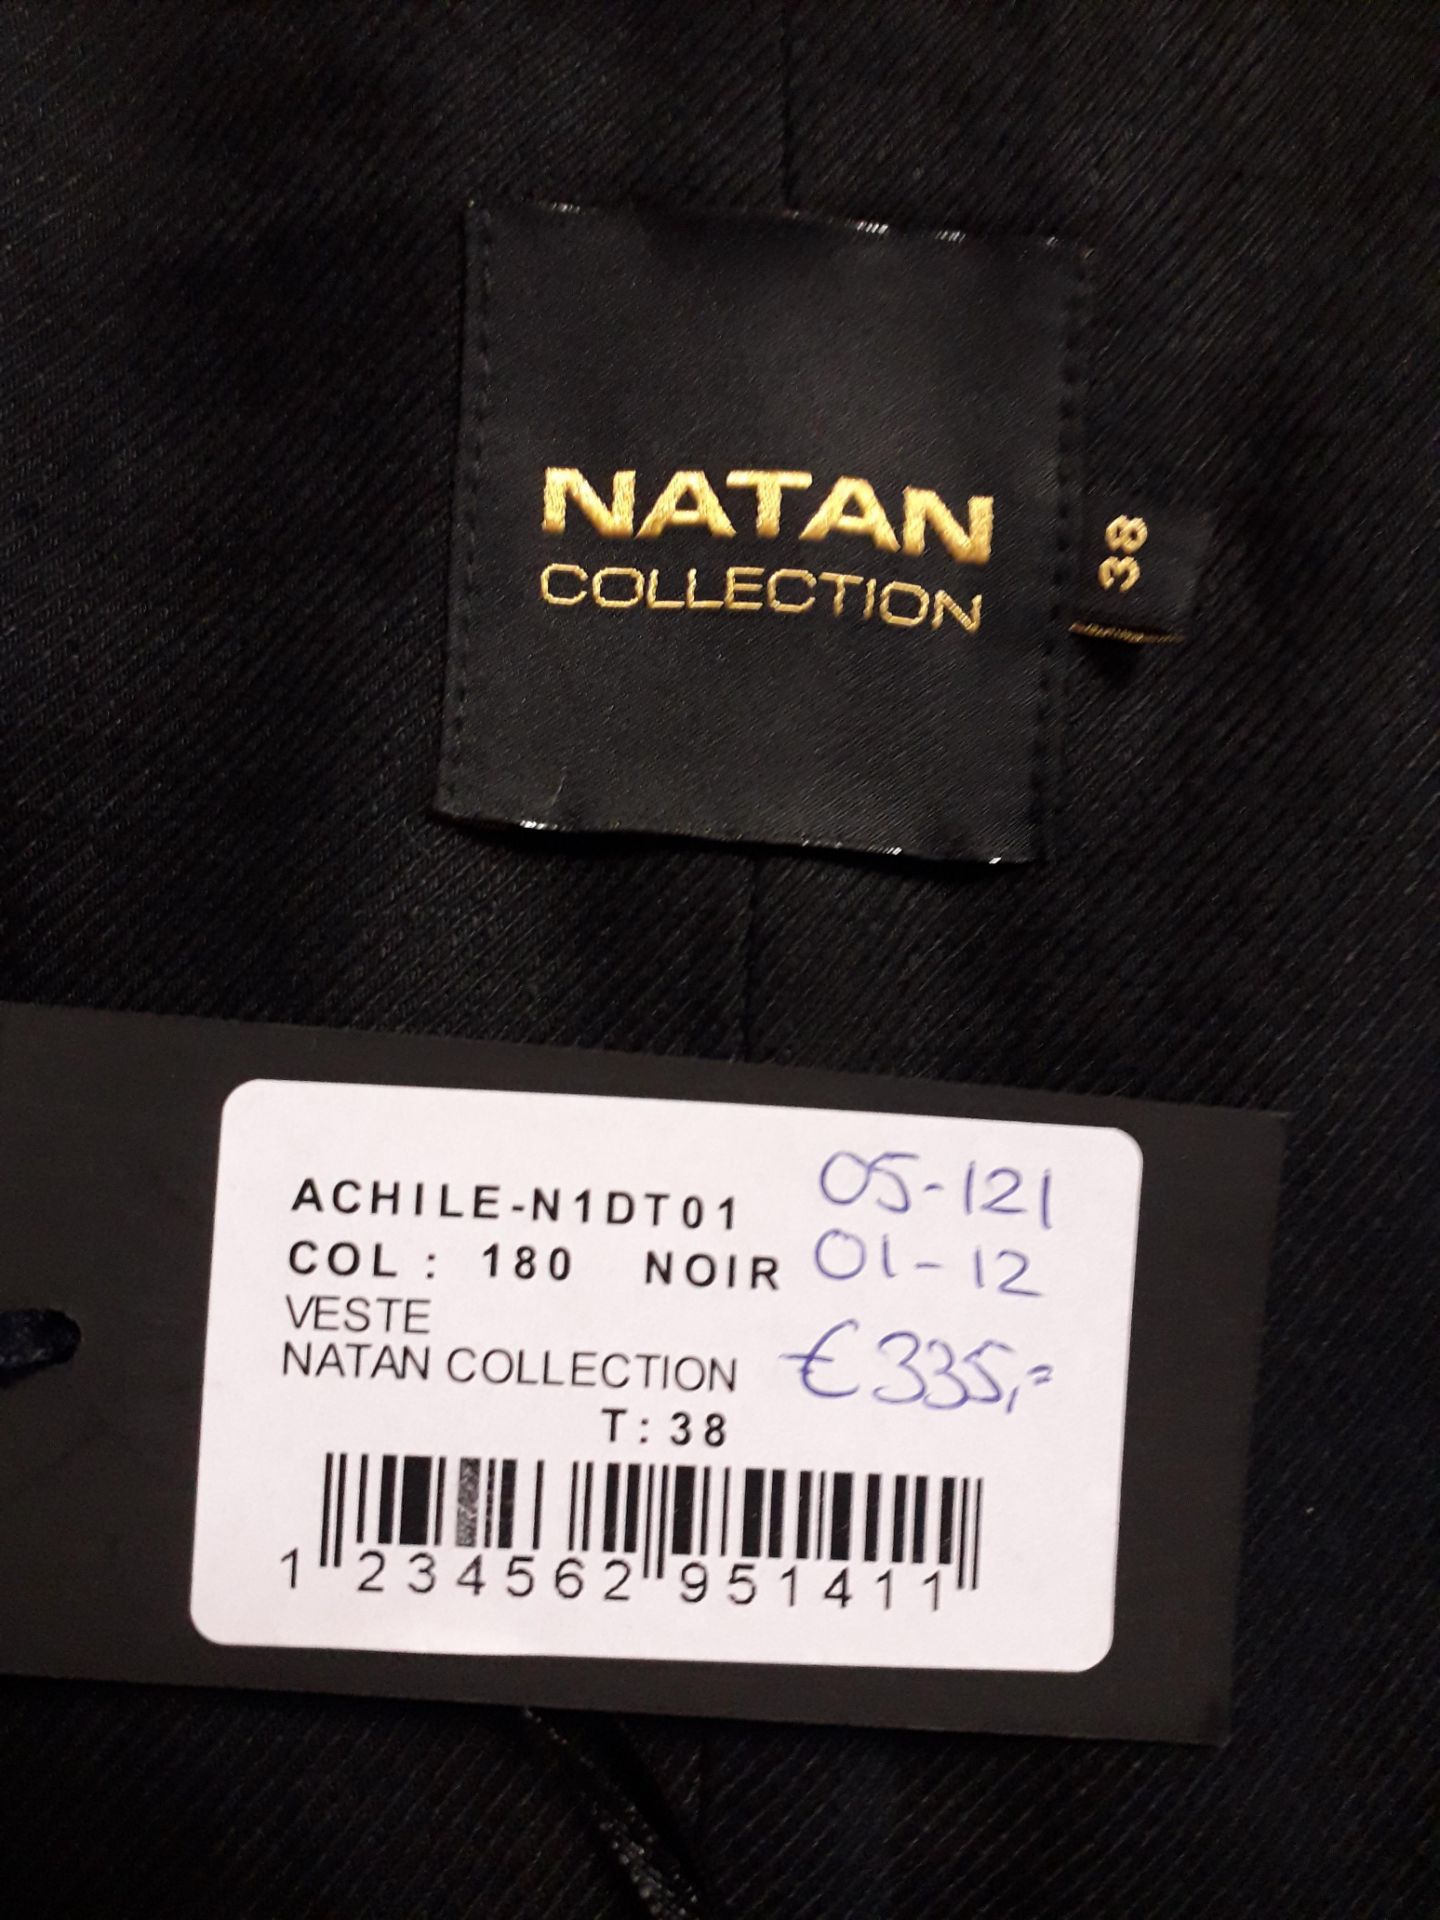 1 x Natan Black Bolero Jacket - Size: 10 - Material: 100% Linen - From a High End Clothing - Image 3 of 5